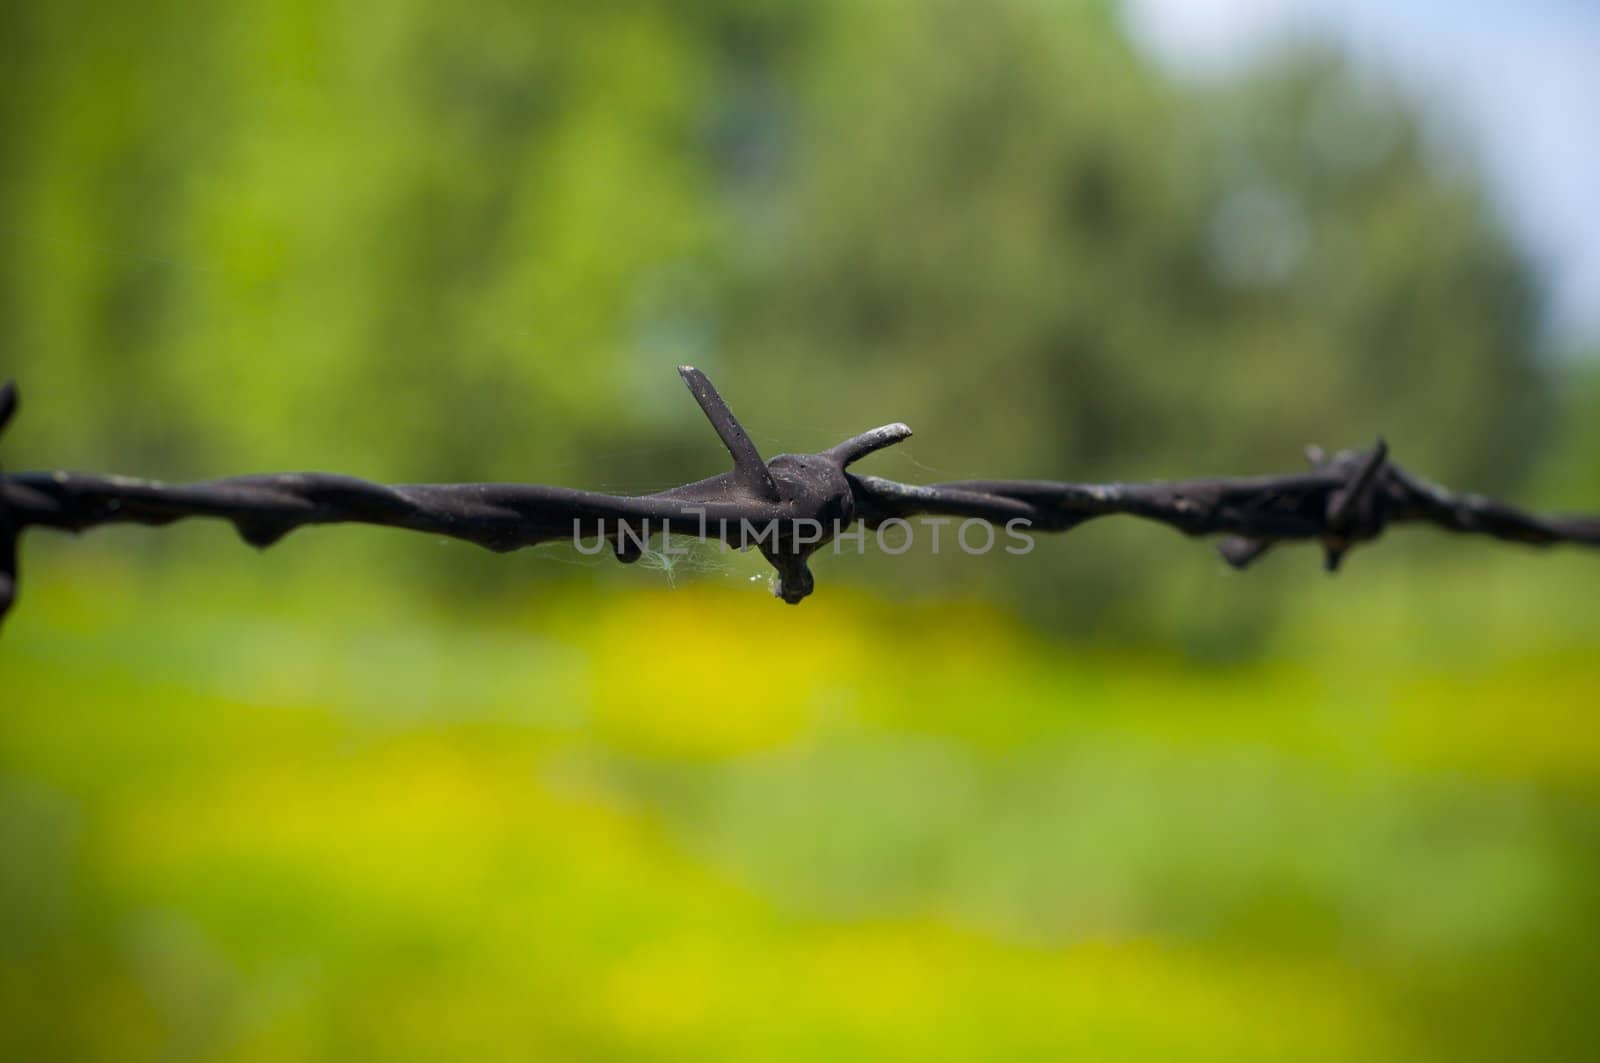 close-up on a barbed wire